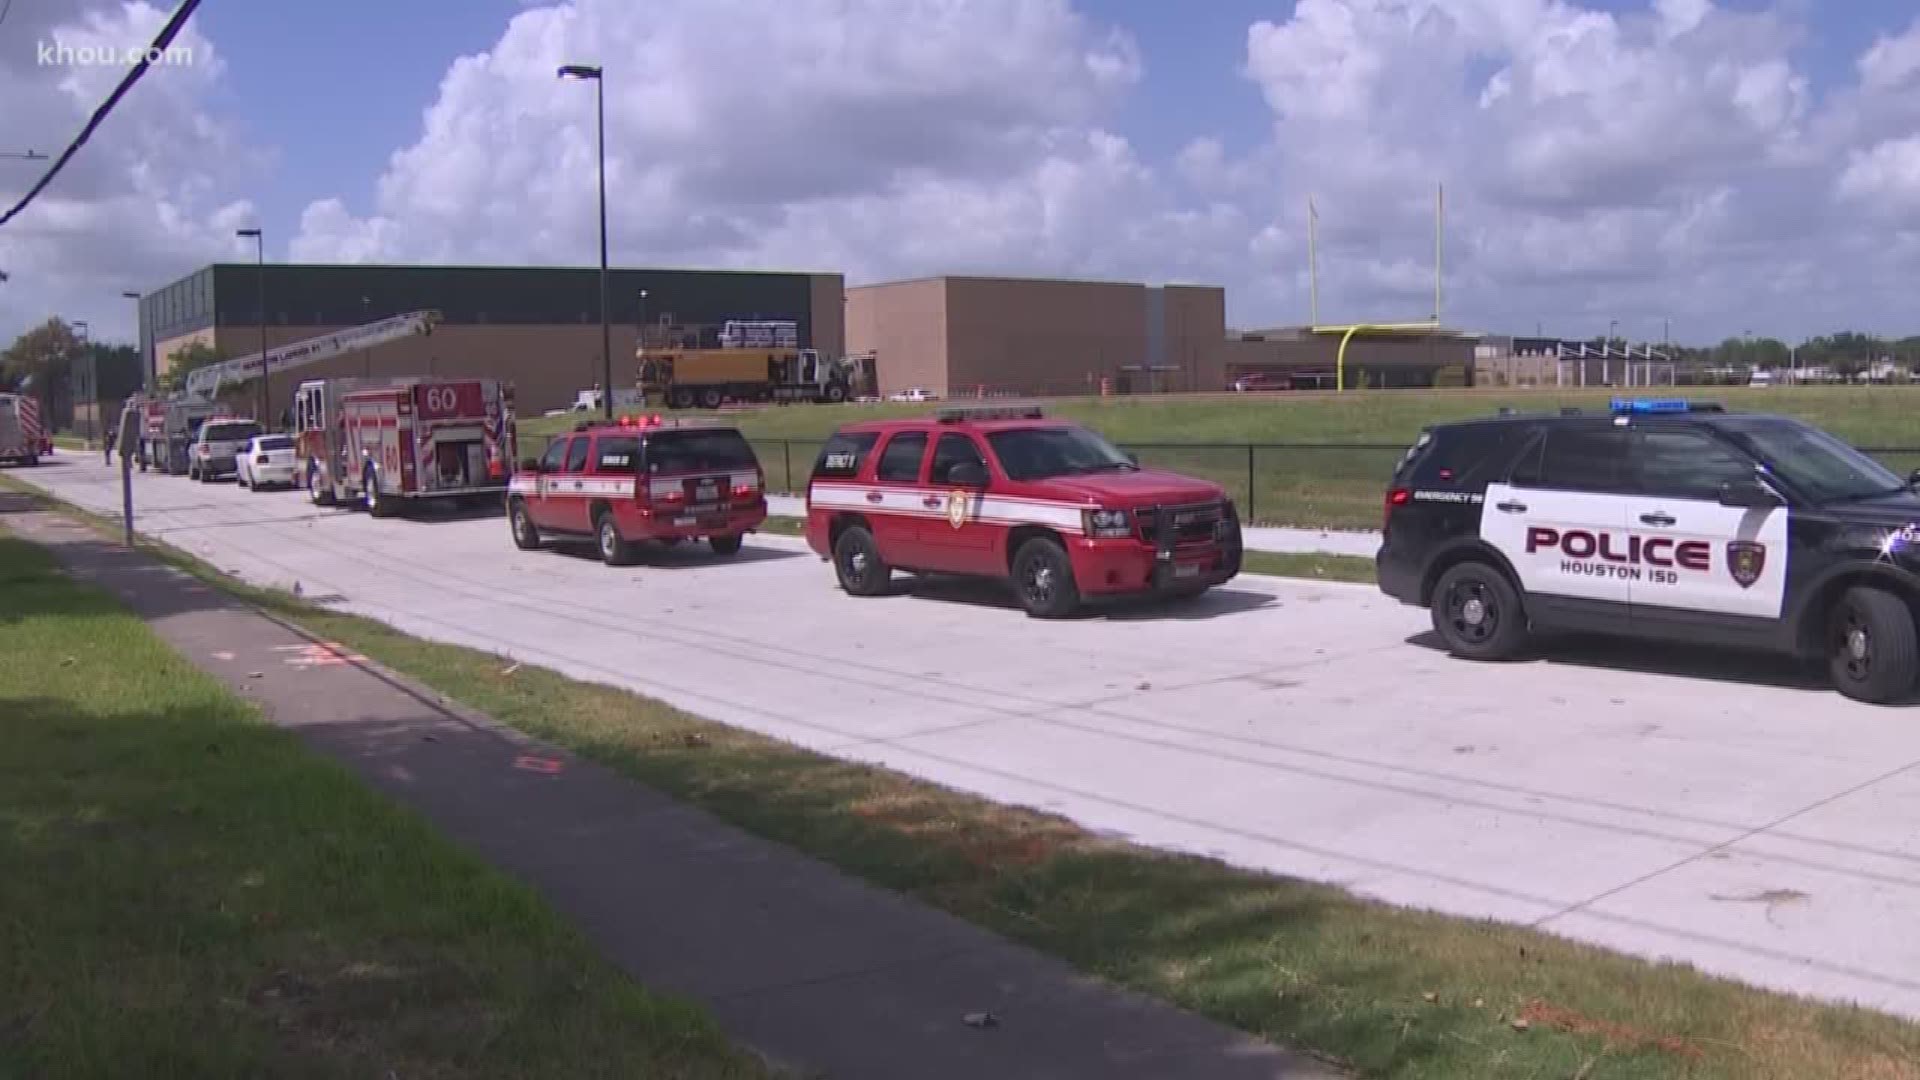 Two men died while working with a tank truck outside Wisdom High School on Monday, the Houston Fire Department said.